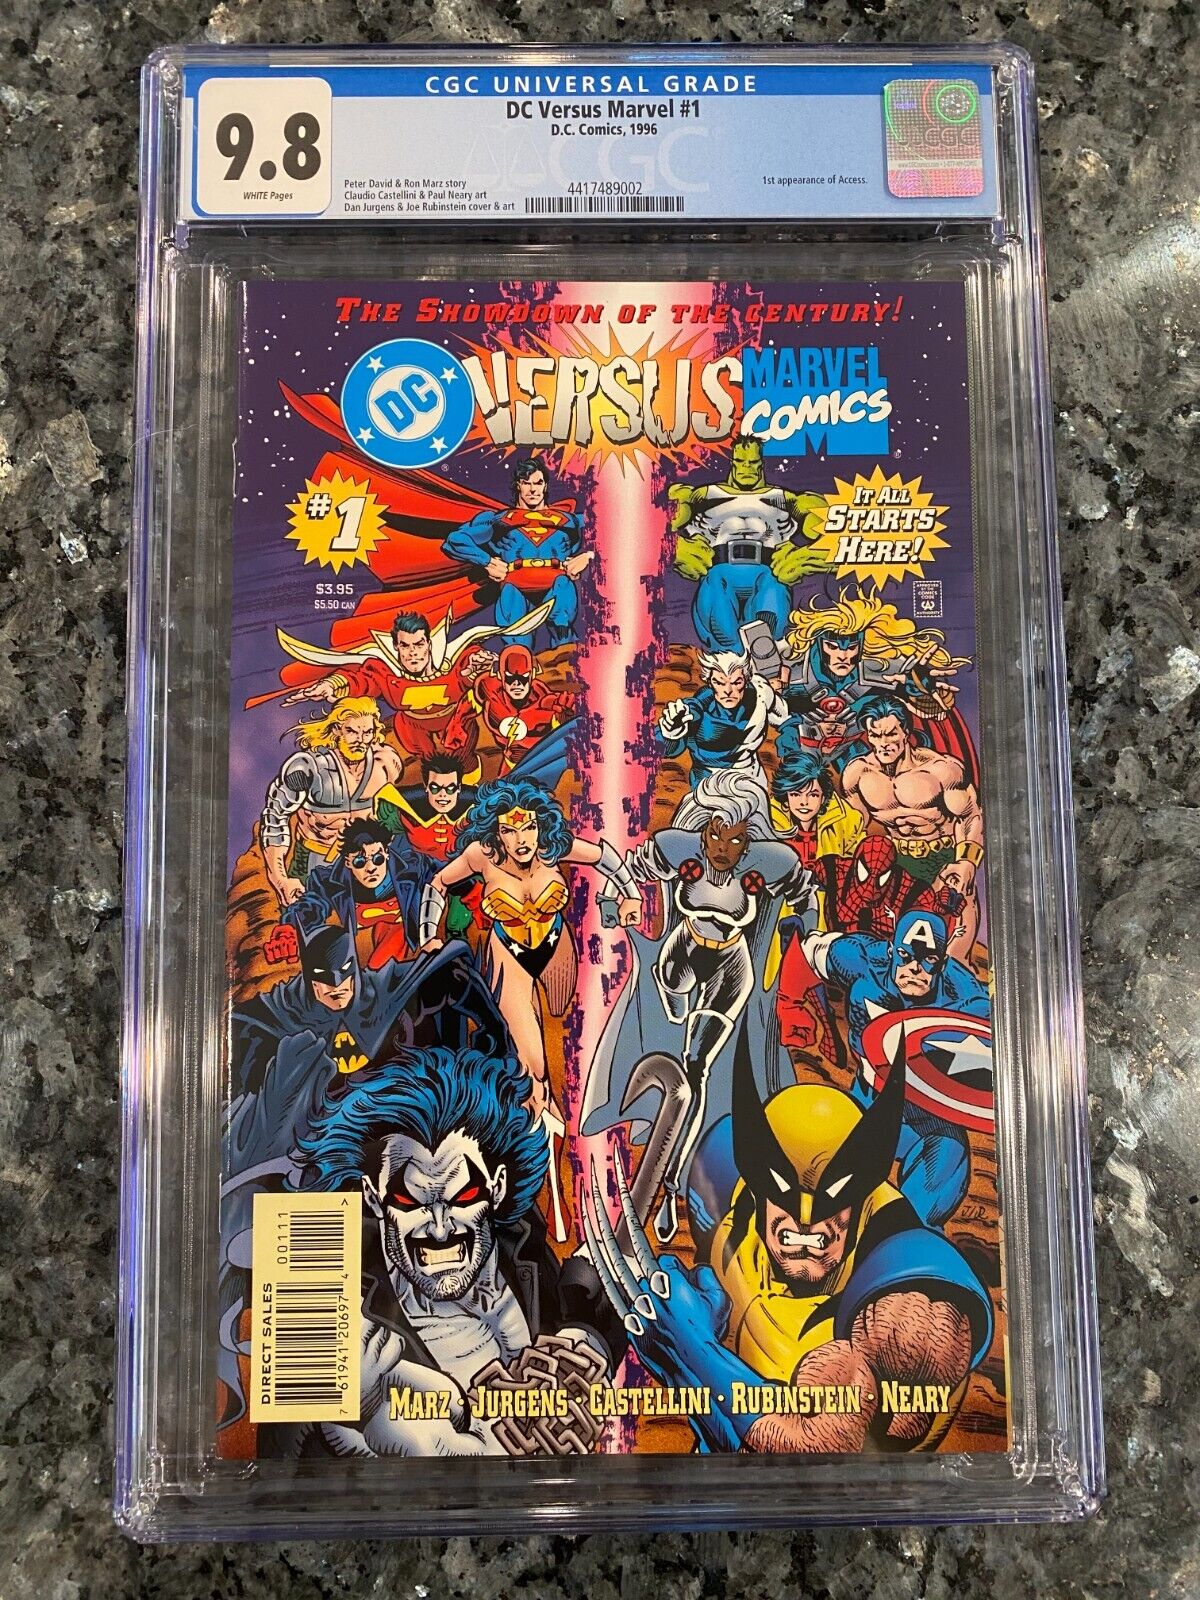 Ultimate Showdown: DC Versus Marvel #1 - CGC 9.8 White Pages 1st App of Access